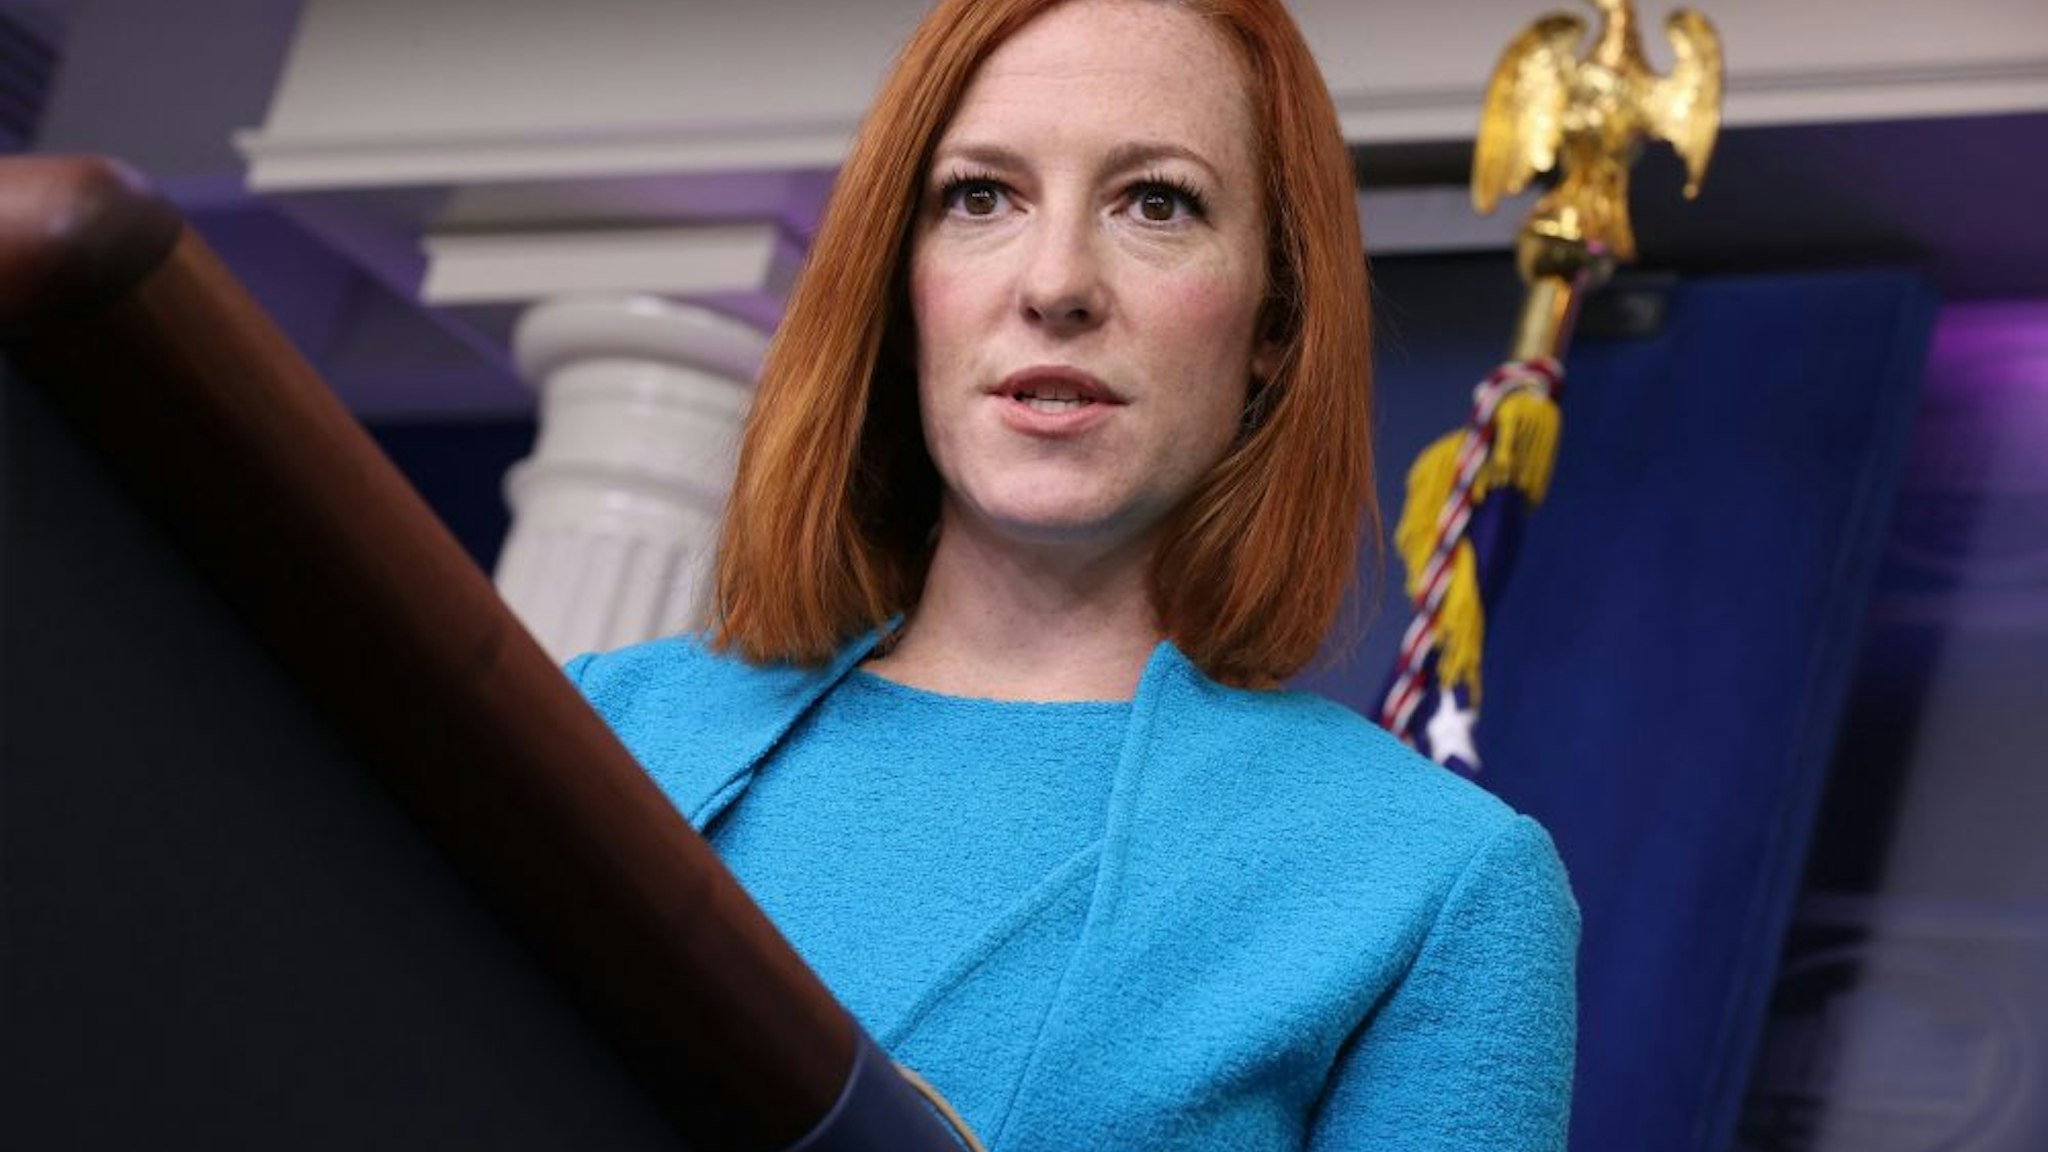 WASHINGTON, DC - APRIL 15: White House Press Secretary Jen Psaki talks to reporters during the daily news conference in the Brady Press Briefing Room at the White House on April 15, 2021 in Washington, DC. Psaki fielded questions about President Joe Biden's decision to withdraw U.S. forces from Afghanistan, the pause in distribution of the Johnson &amp; Johnson COVID-19 vaccine and other topics.